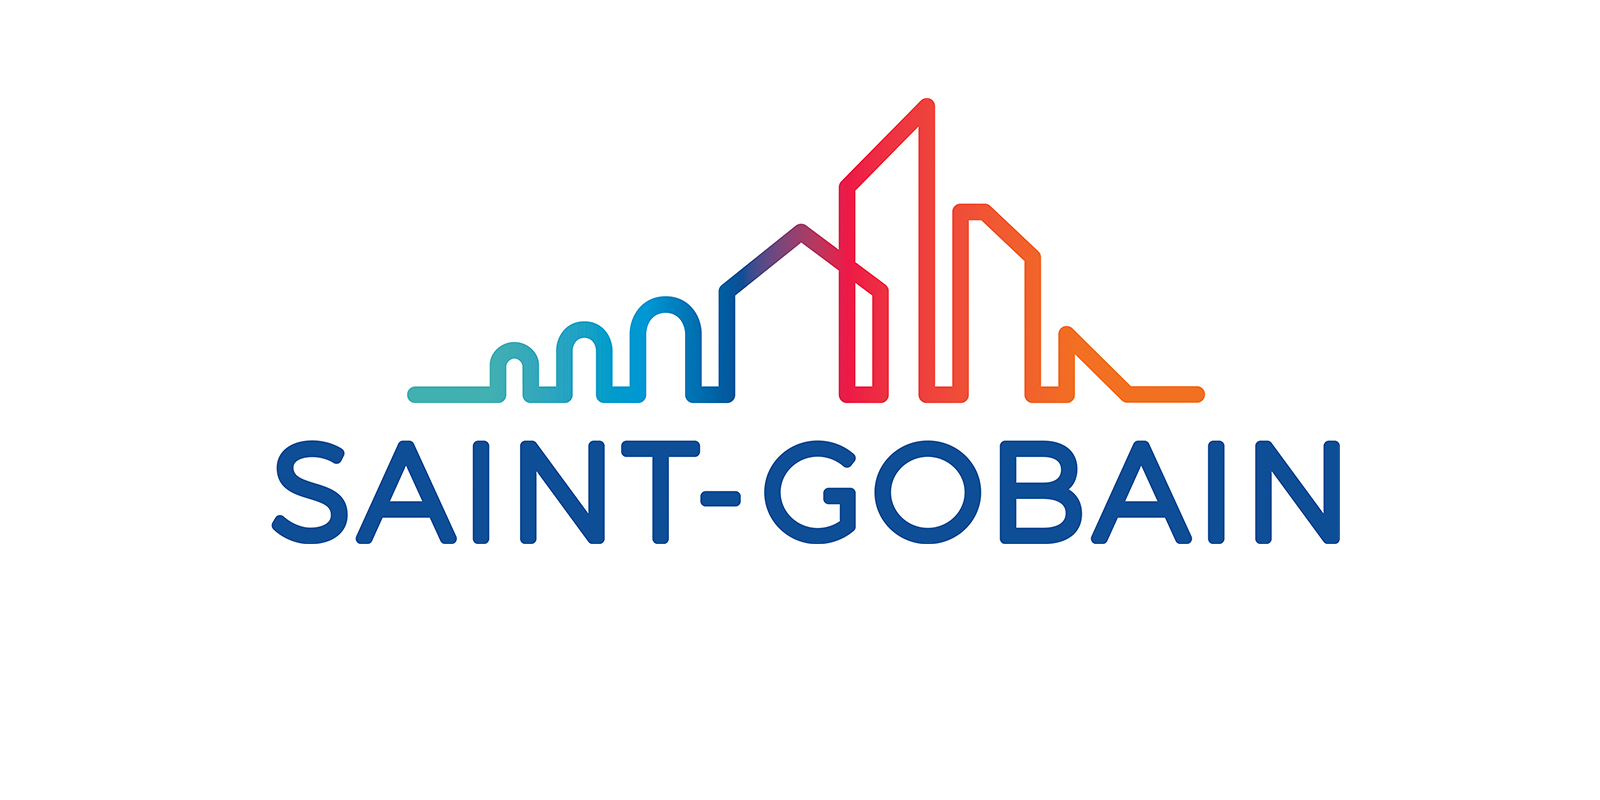 Archisearch Saint-Gobain recognized as one of the 100 most innovative companies in the world